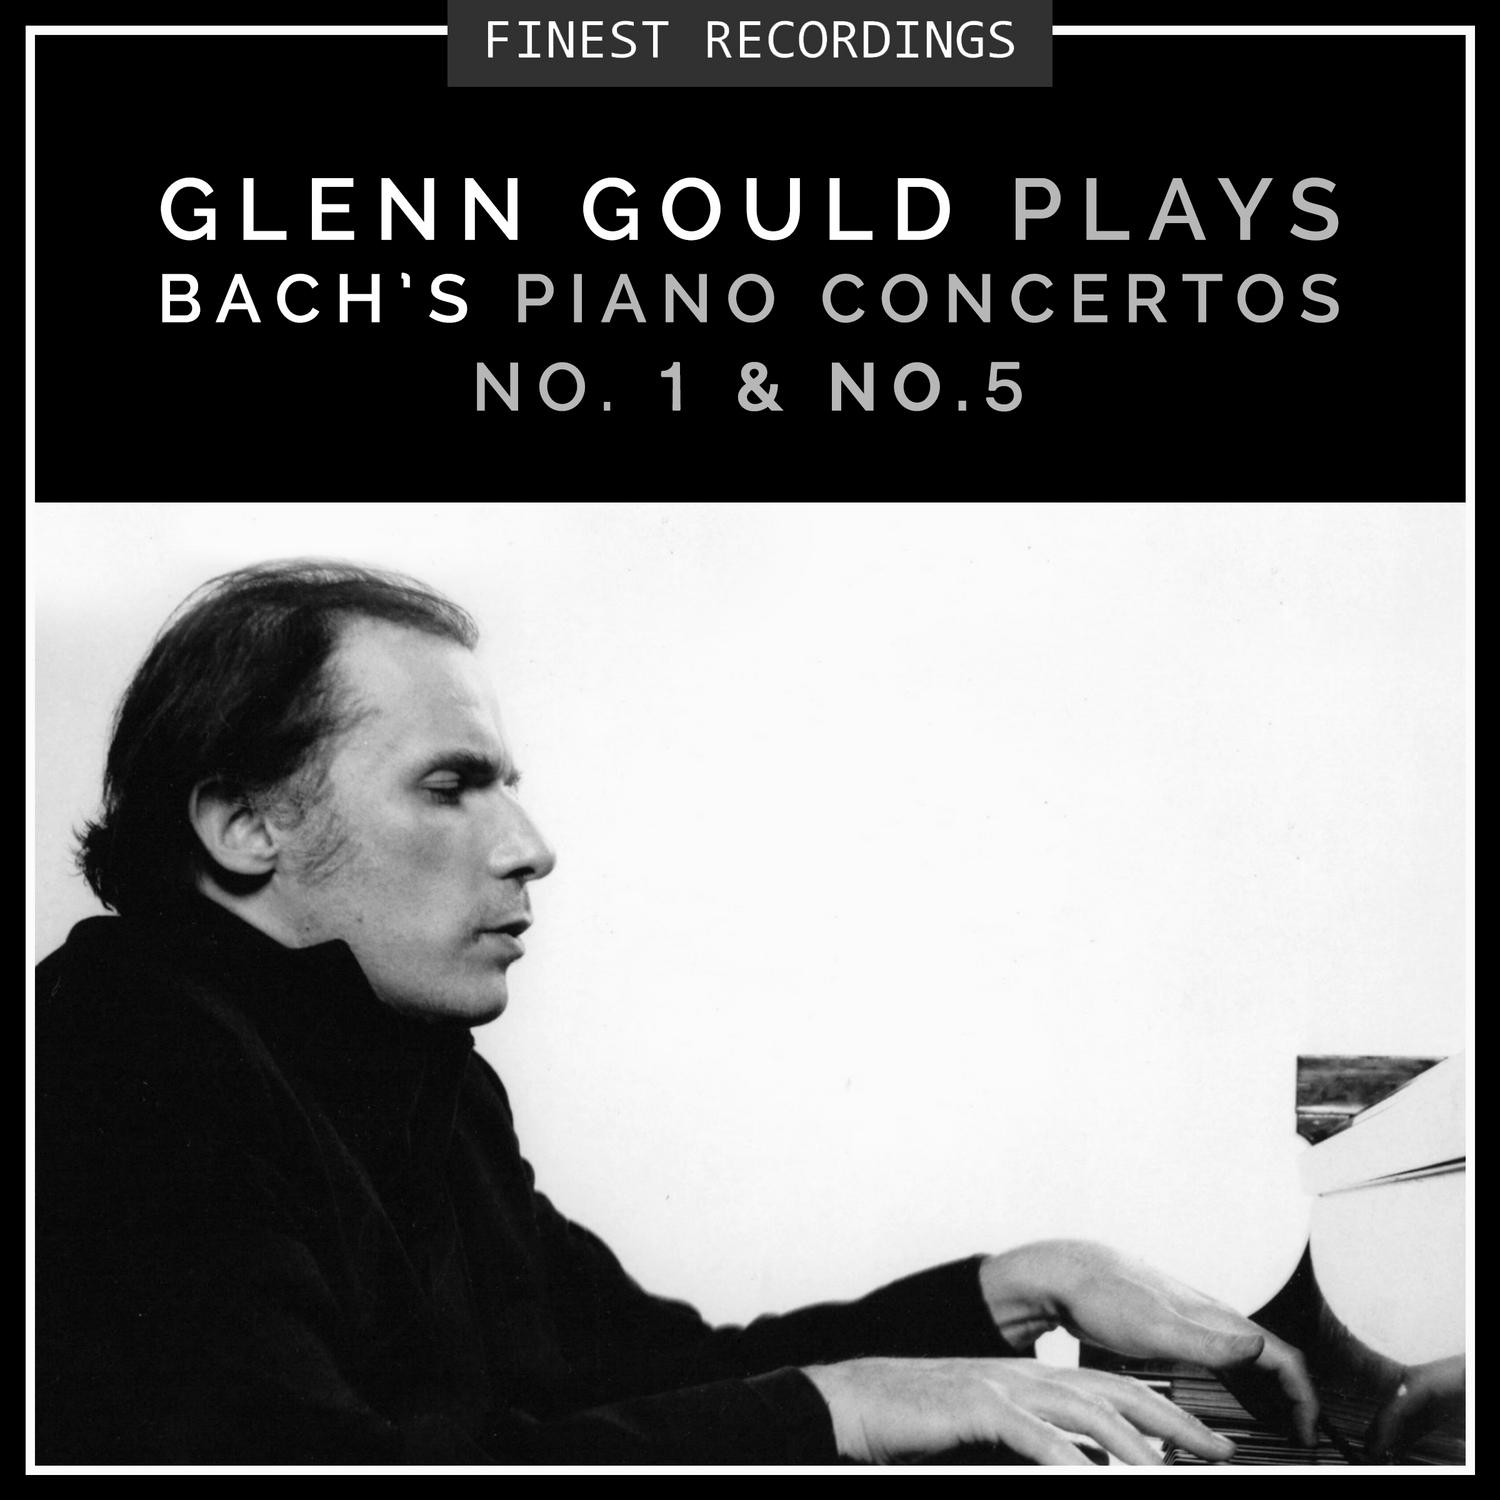 Concerto for Keyboard and Orchestra No. 5 in F Minor, BWV 1056: I. Allegro